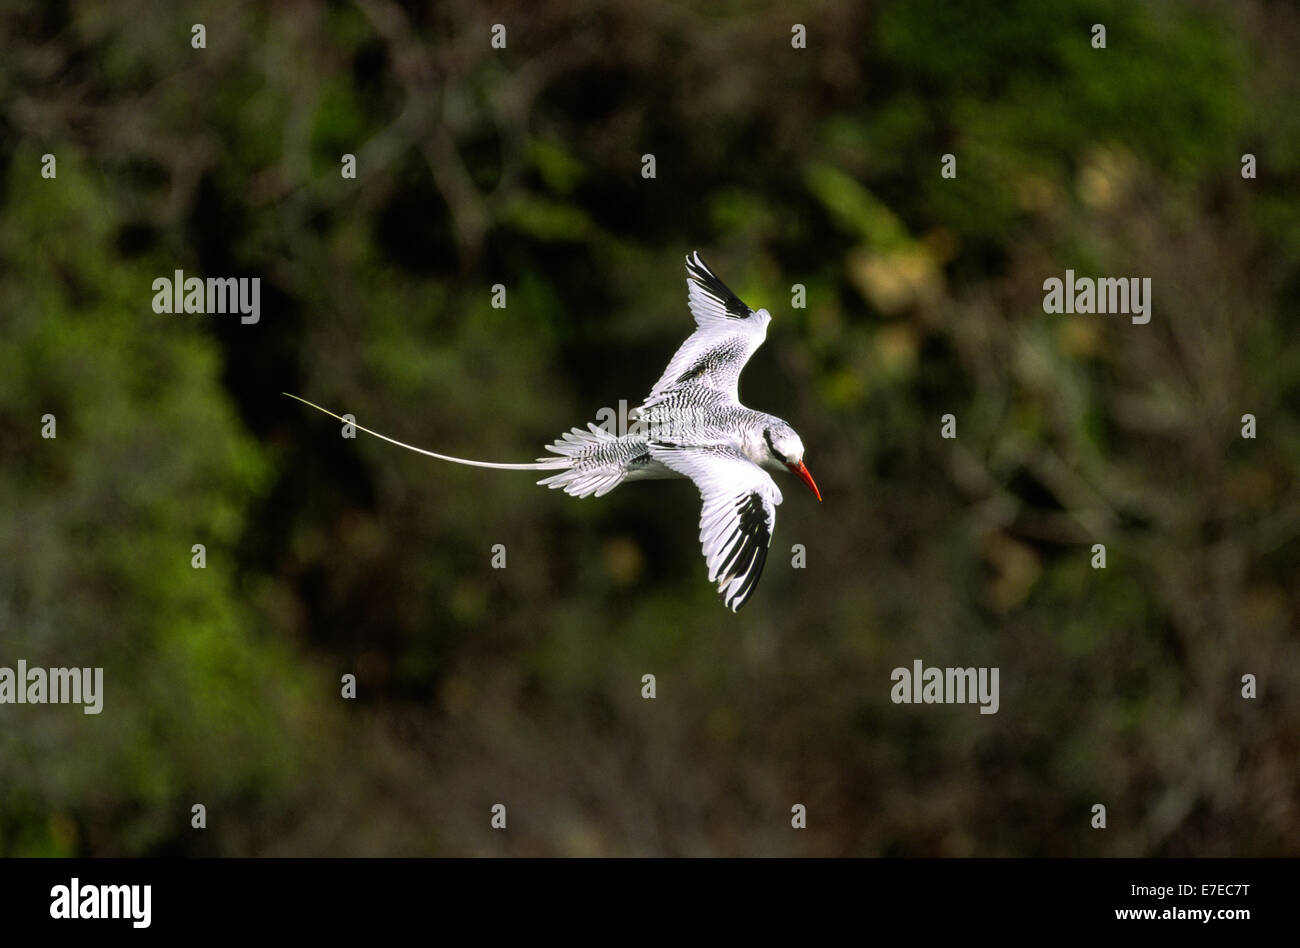 RED BILLED TROPIC BIRD  (Phaethon aethereus) FLYING OVER A FOREST IN TOBAGO WEST INDIES Stock Photo